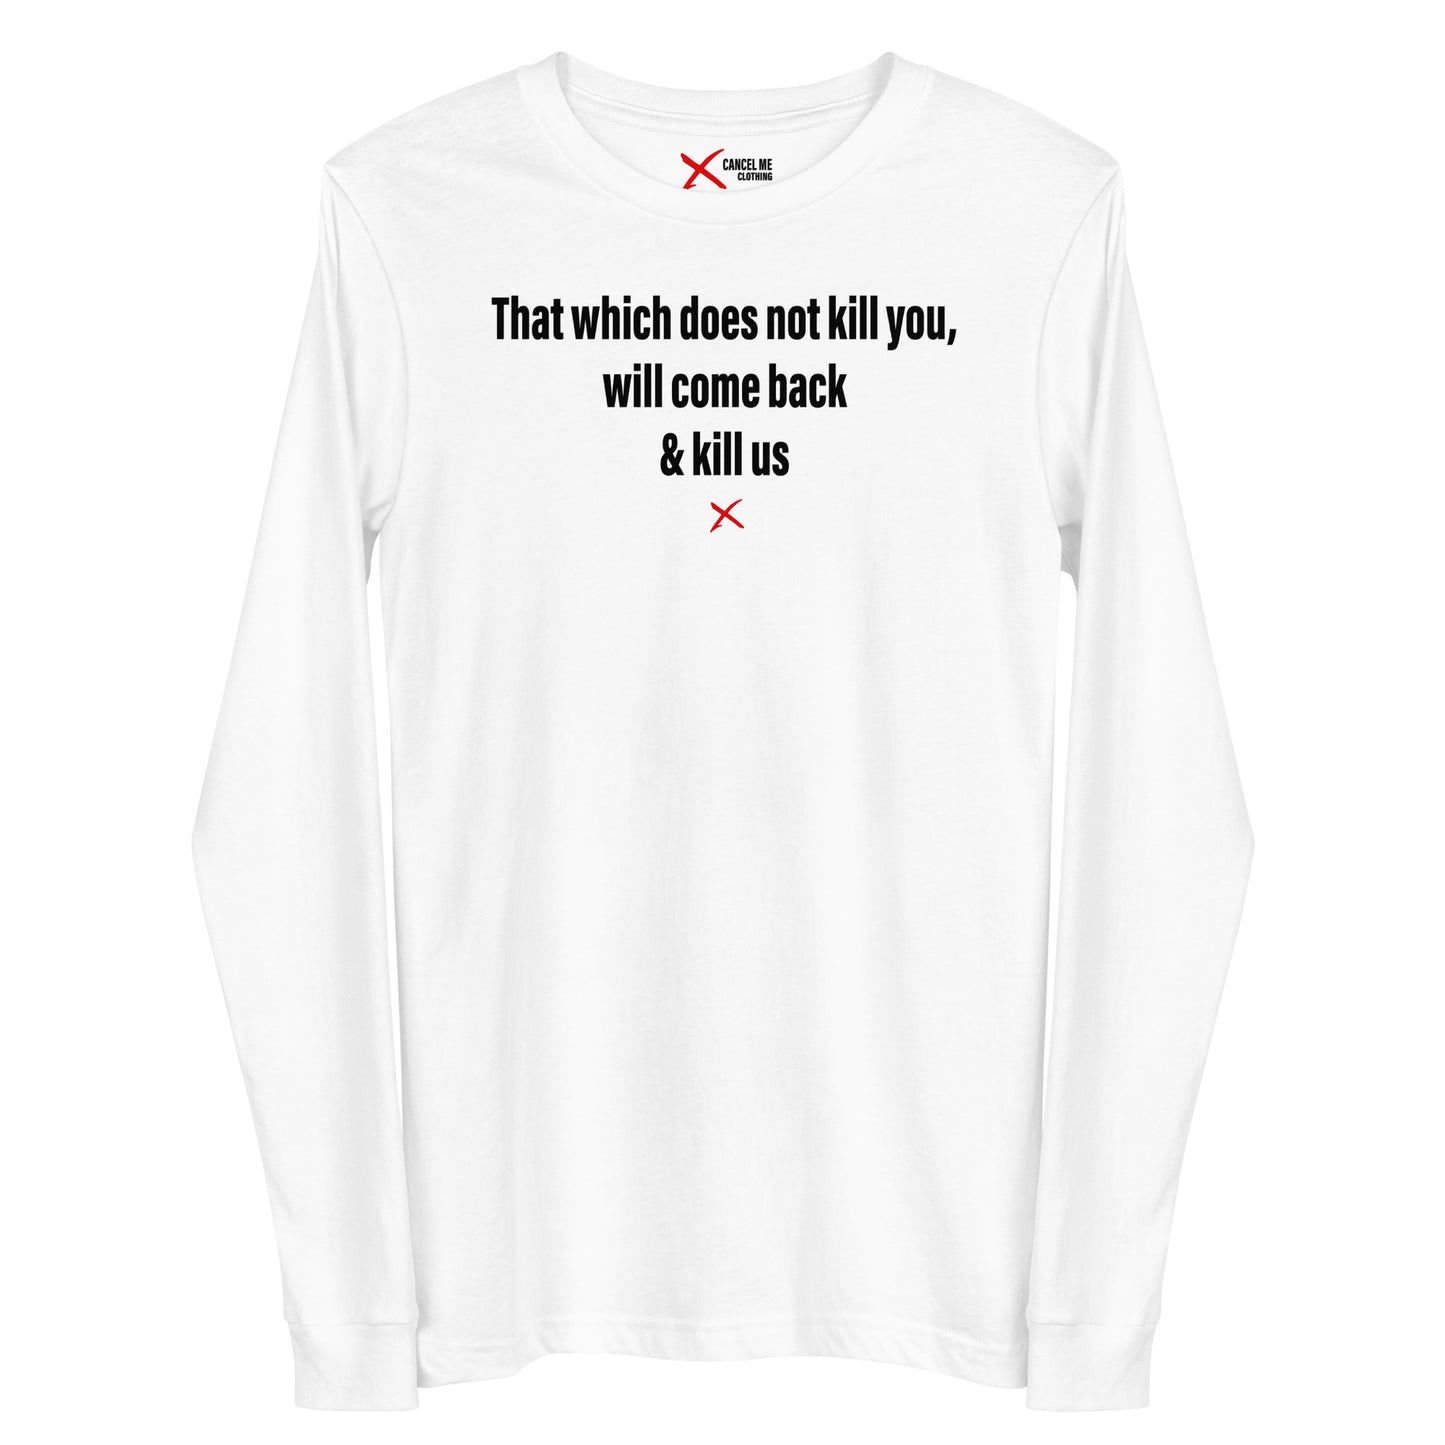 That which does not kill you, will come back & kill us - Longsleeve